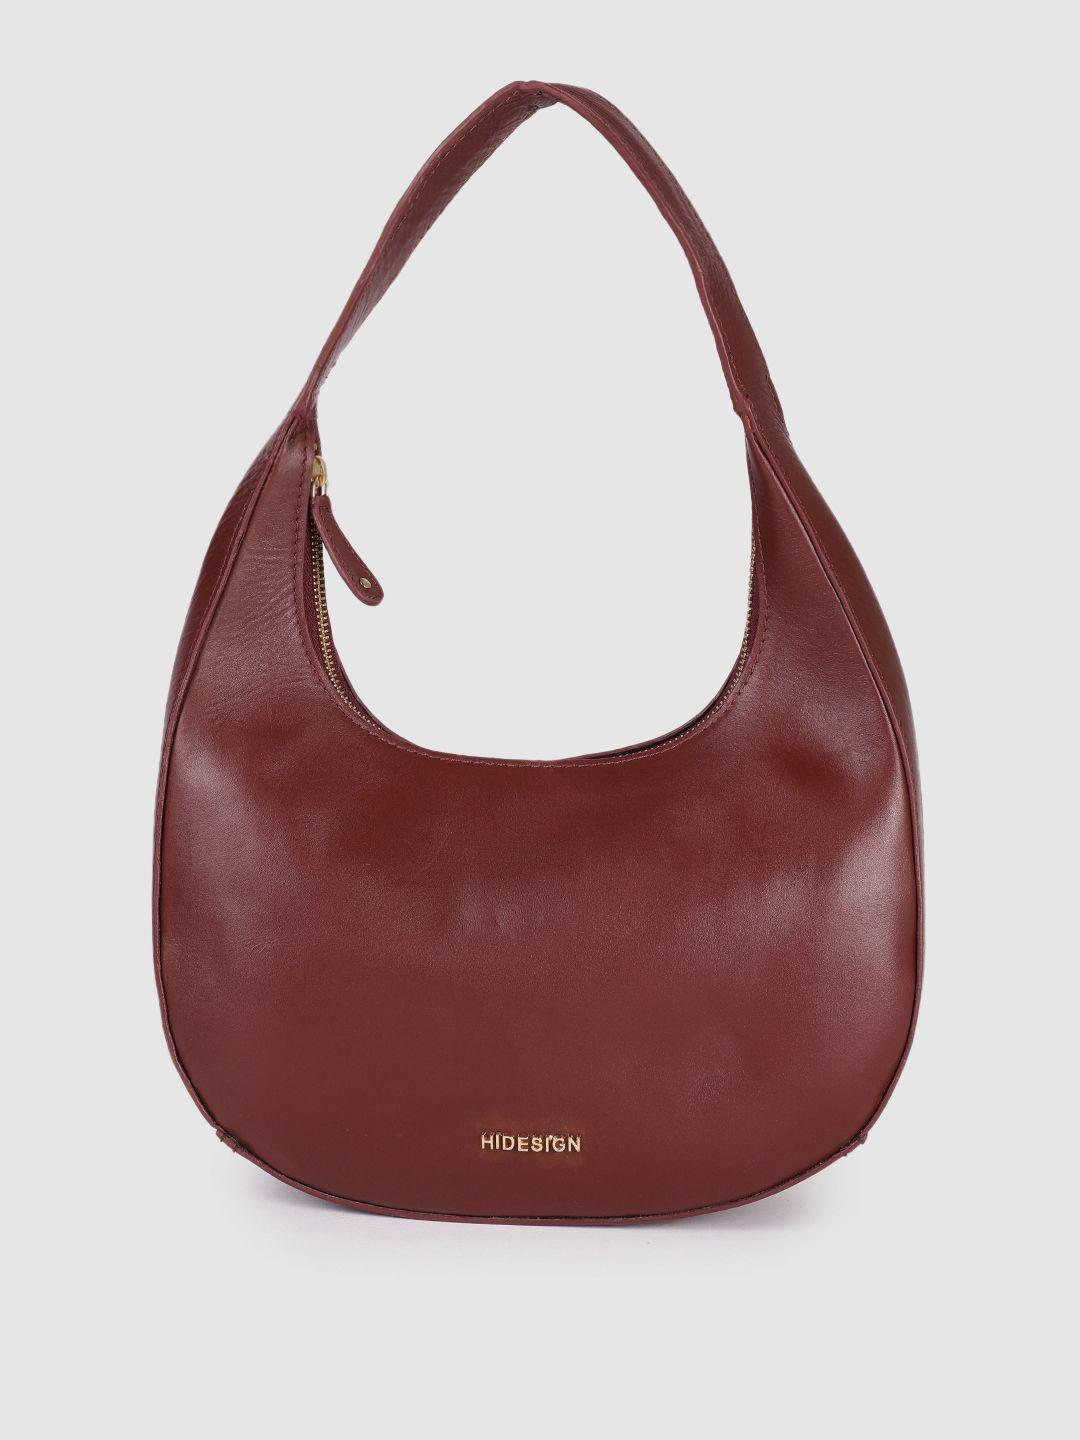 hidesign maroon leather structured hobo bag